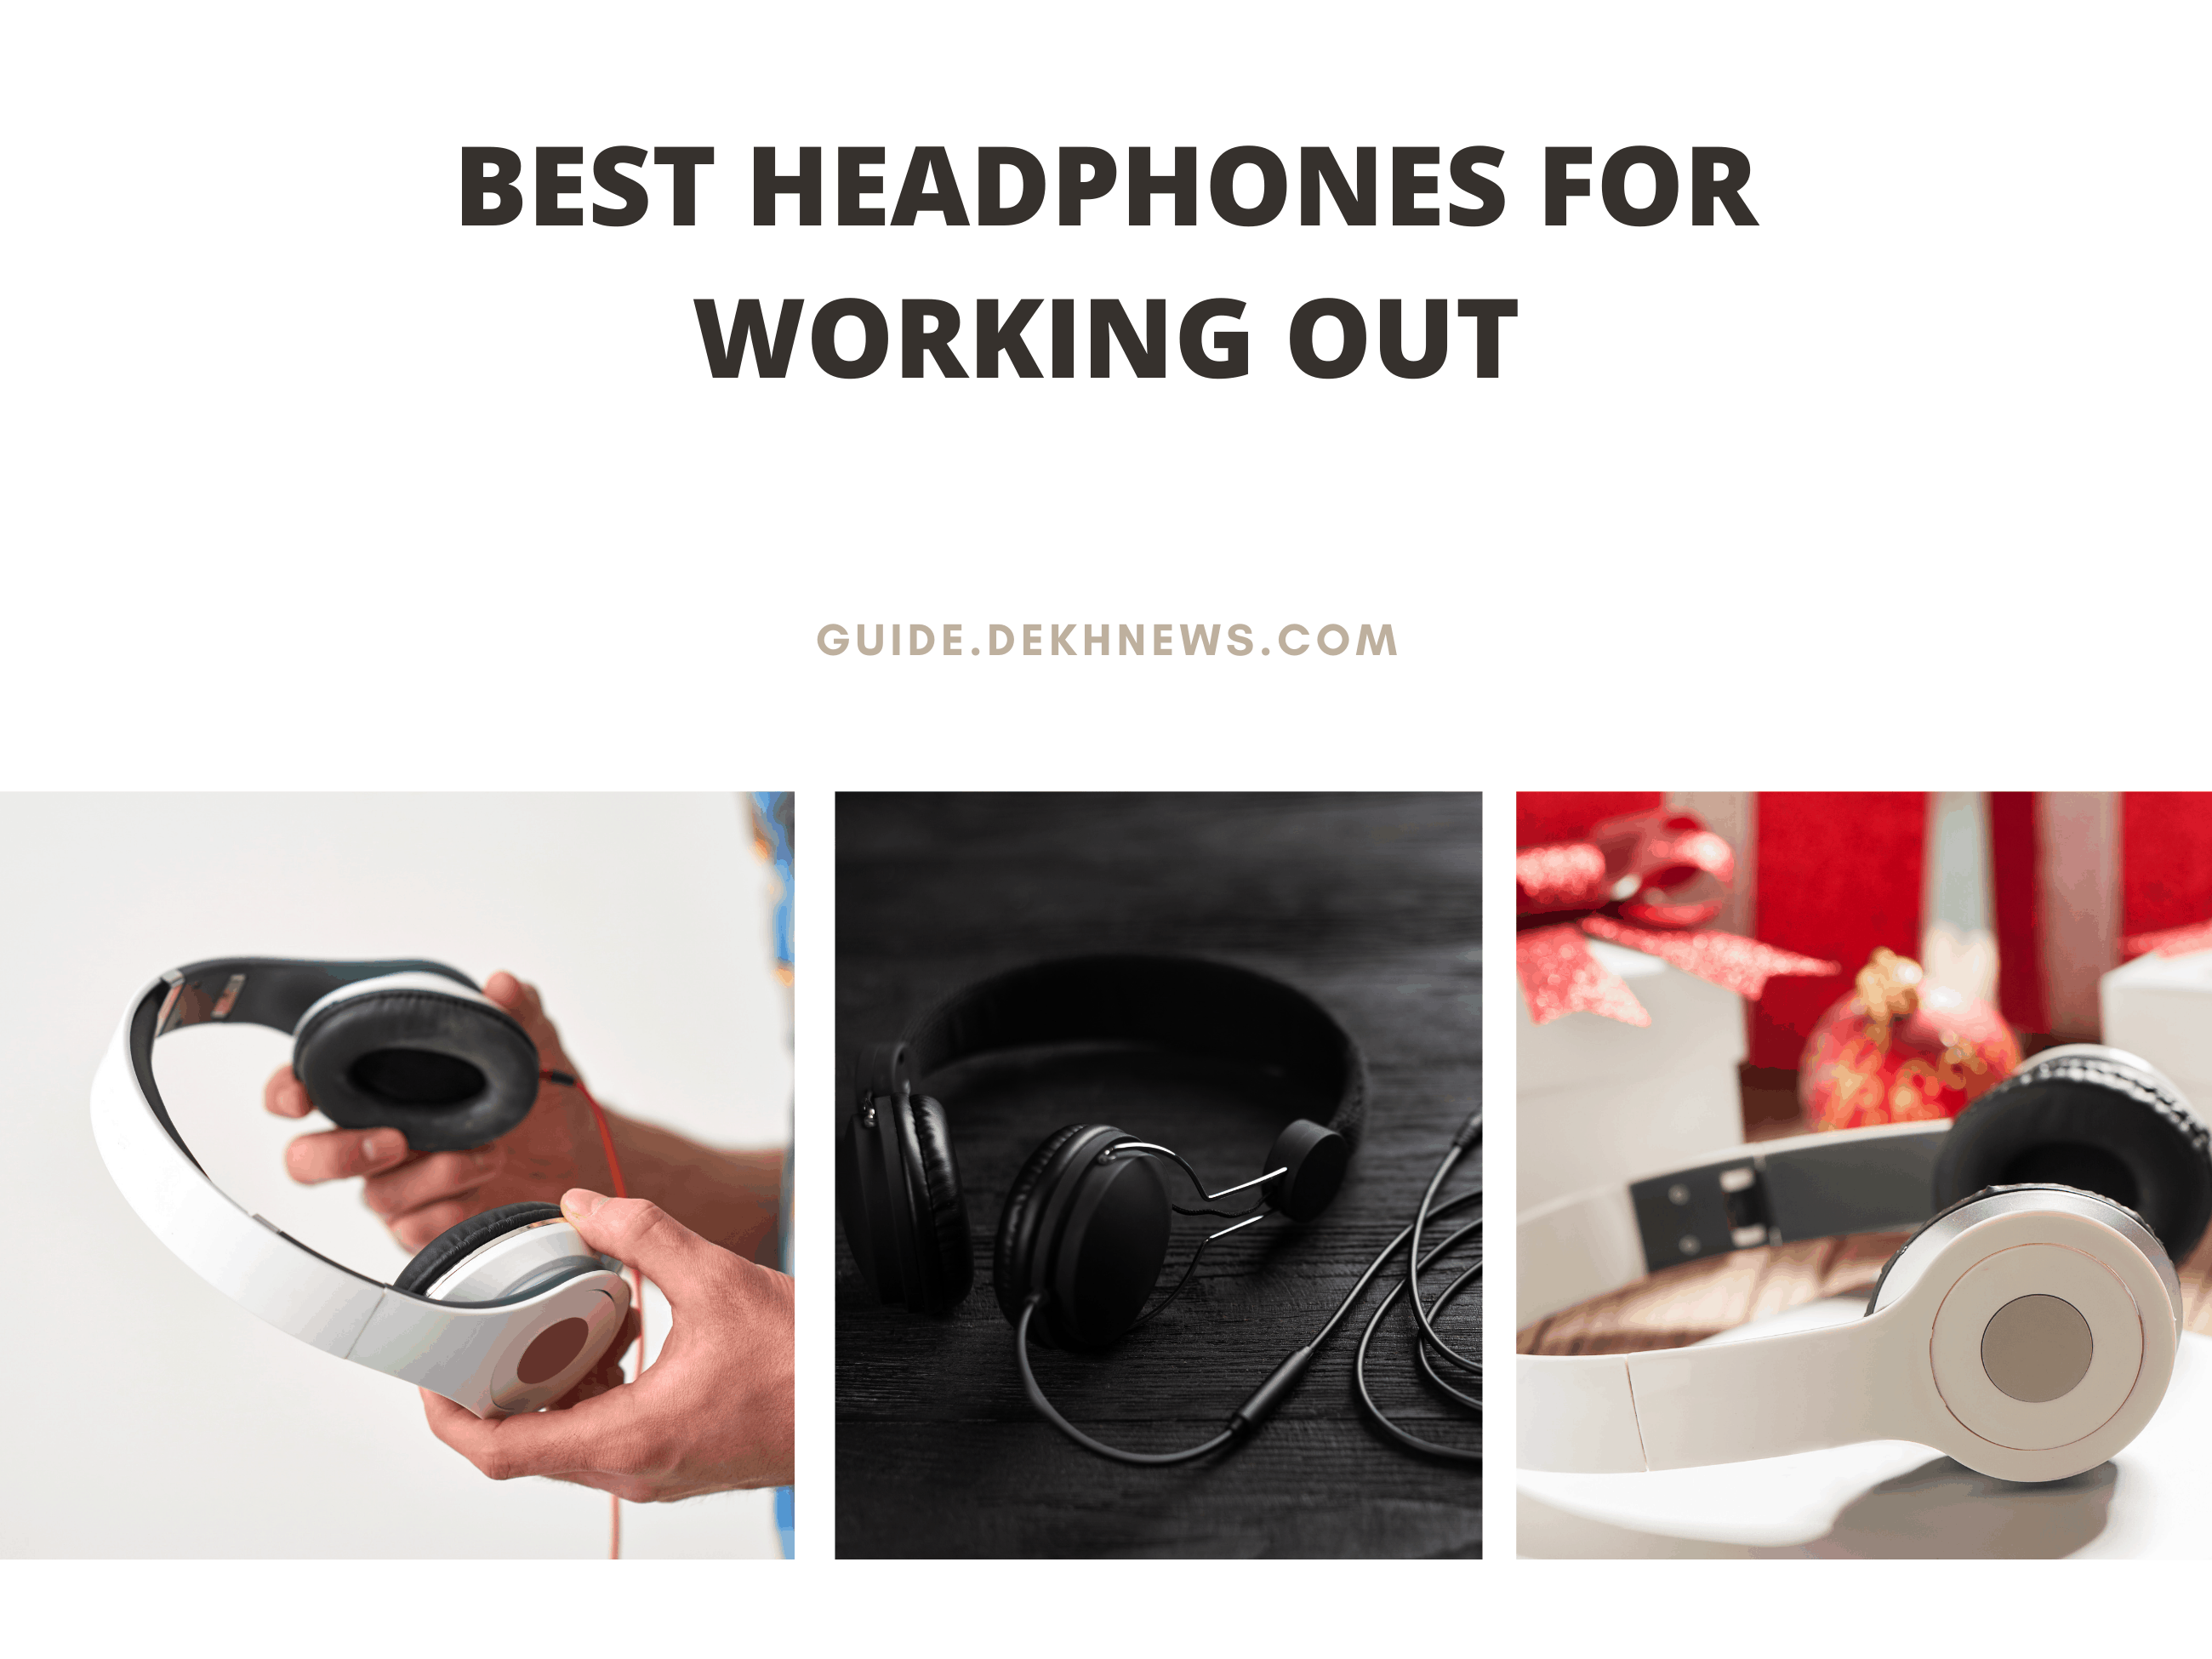 7 Best Headphones for Working Out, Running and Sports (2022 Reviews)